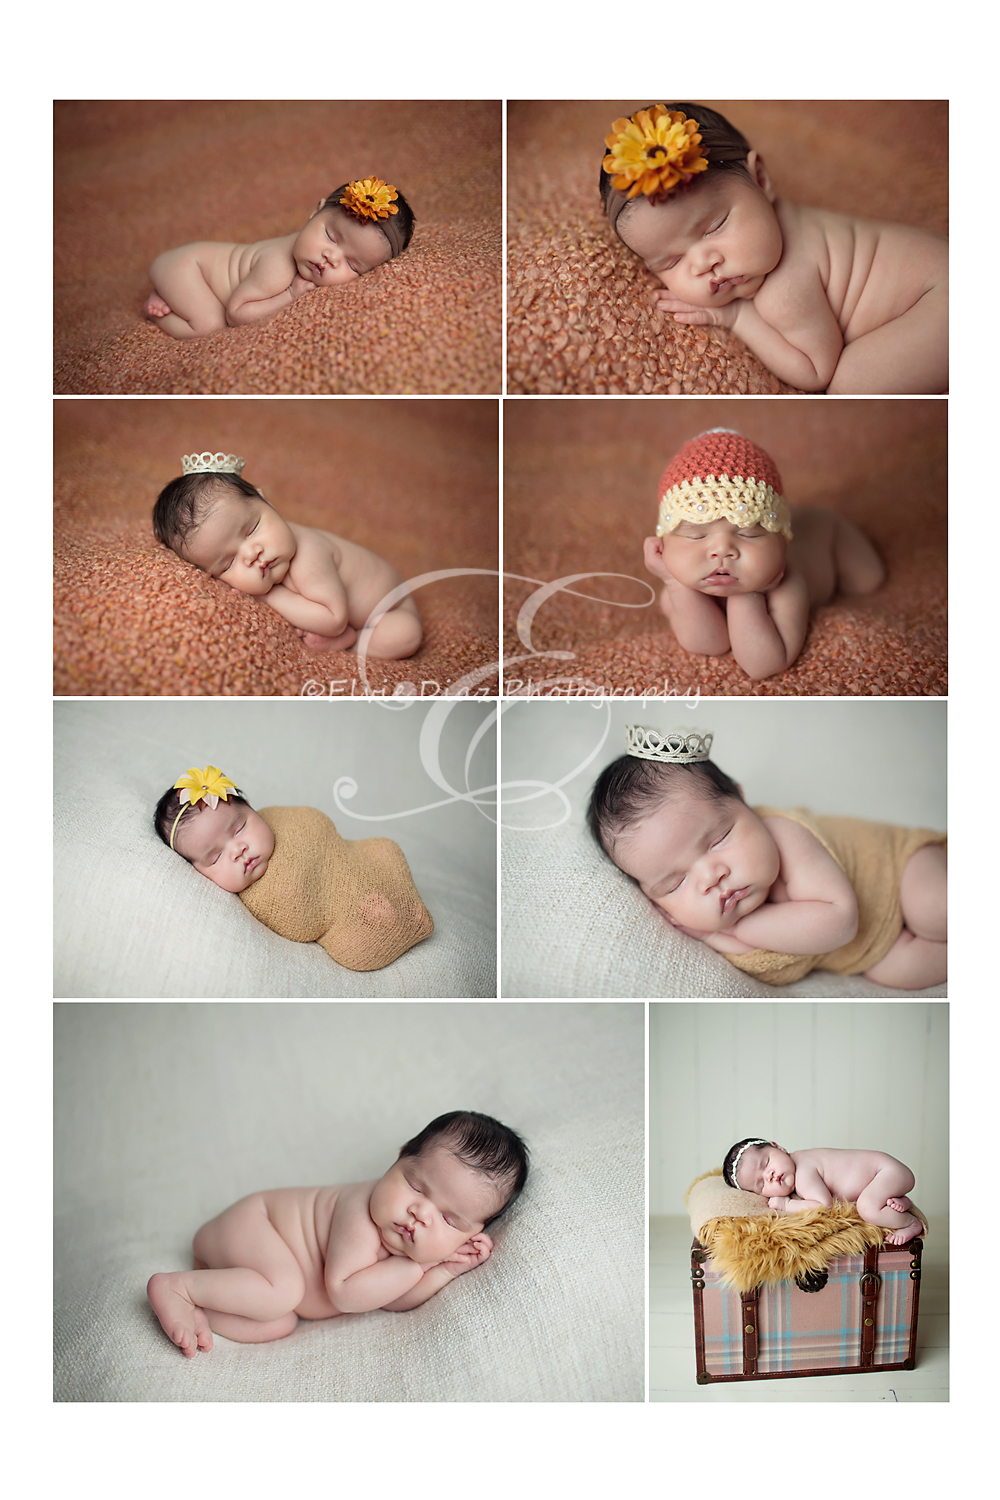 Ximena came to visit me at just a few days old(Chicago Newborn Photographer)